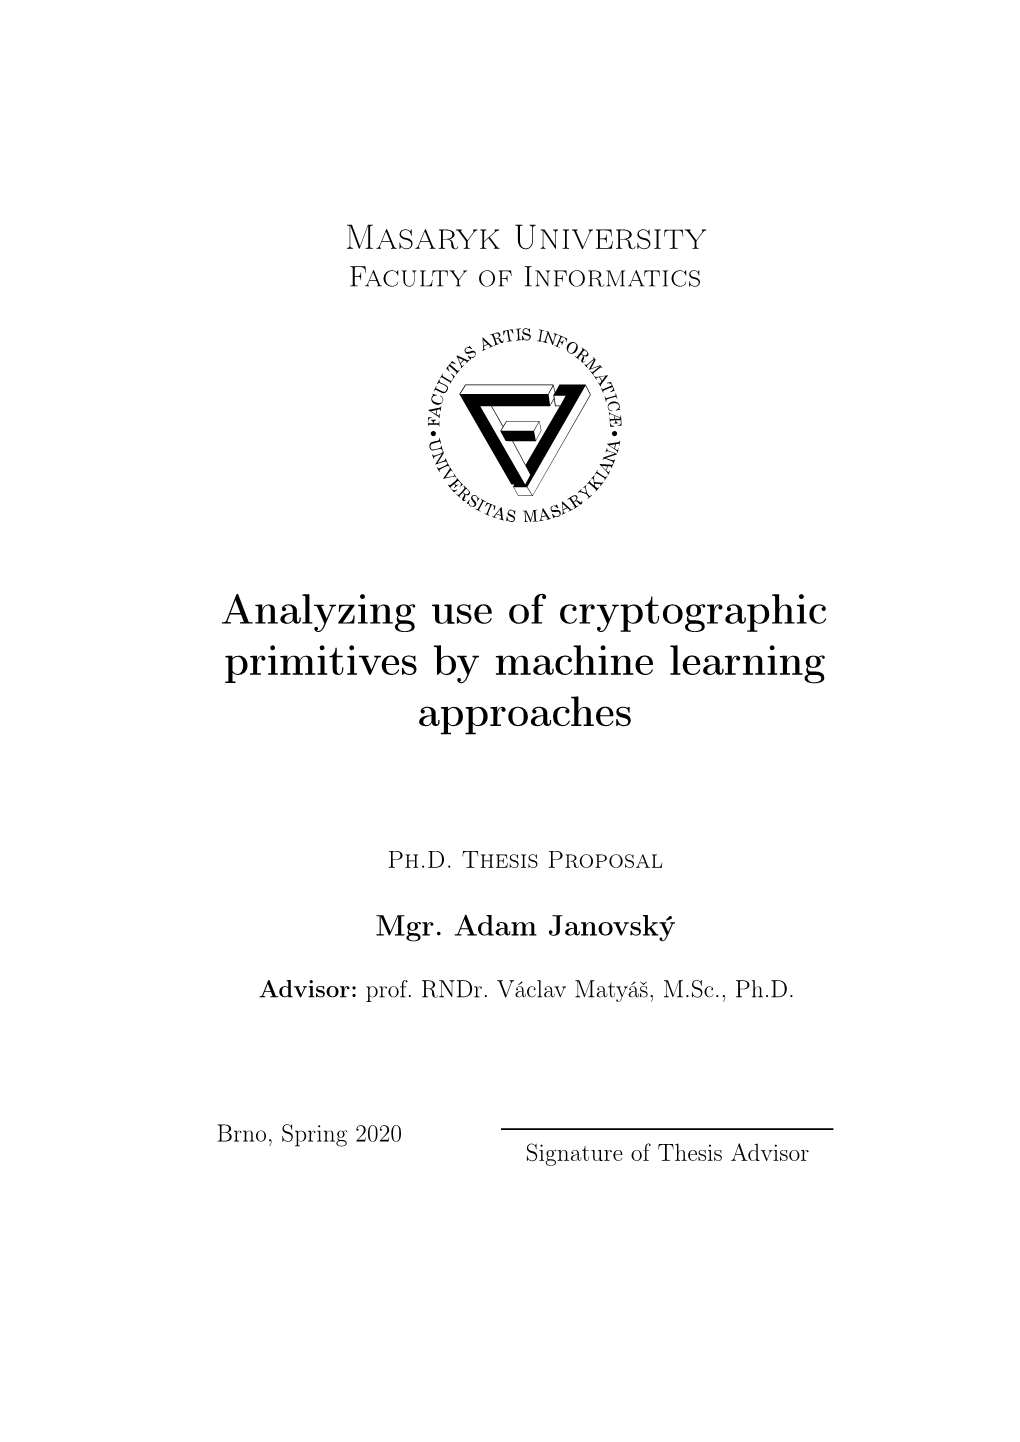 Analyzing Use of Cryptographic Primitives by Machine Learning Approaches